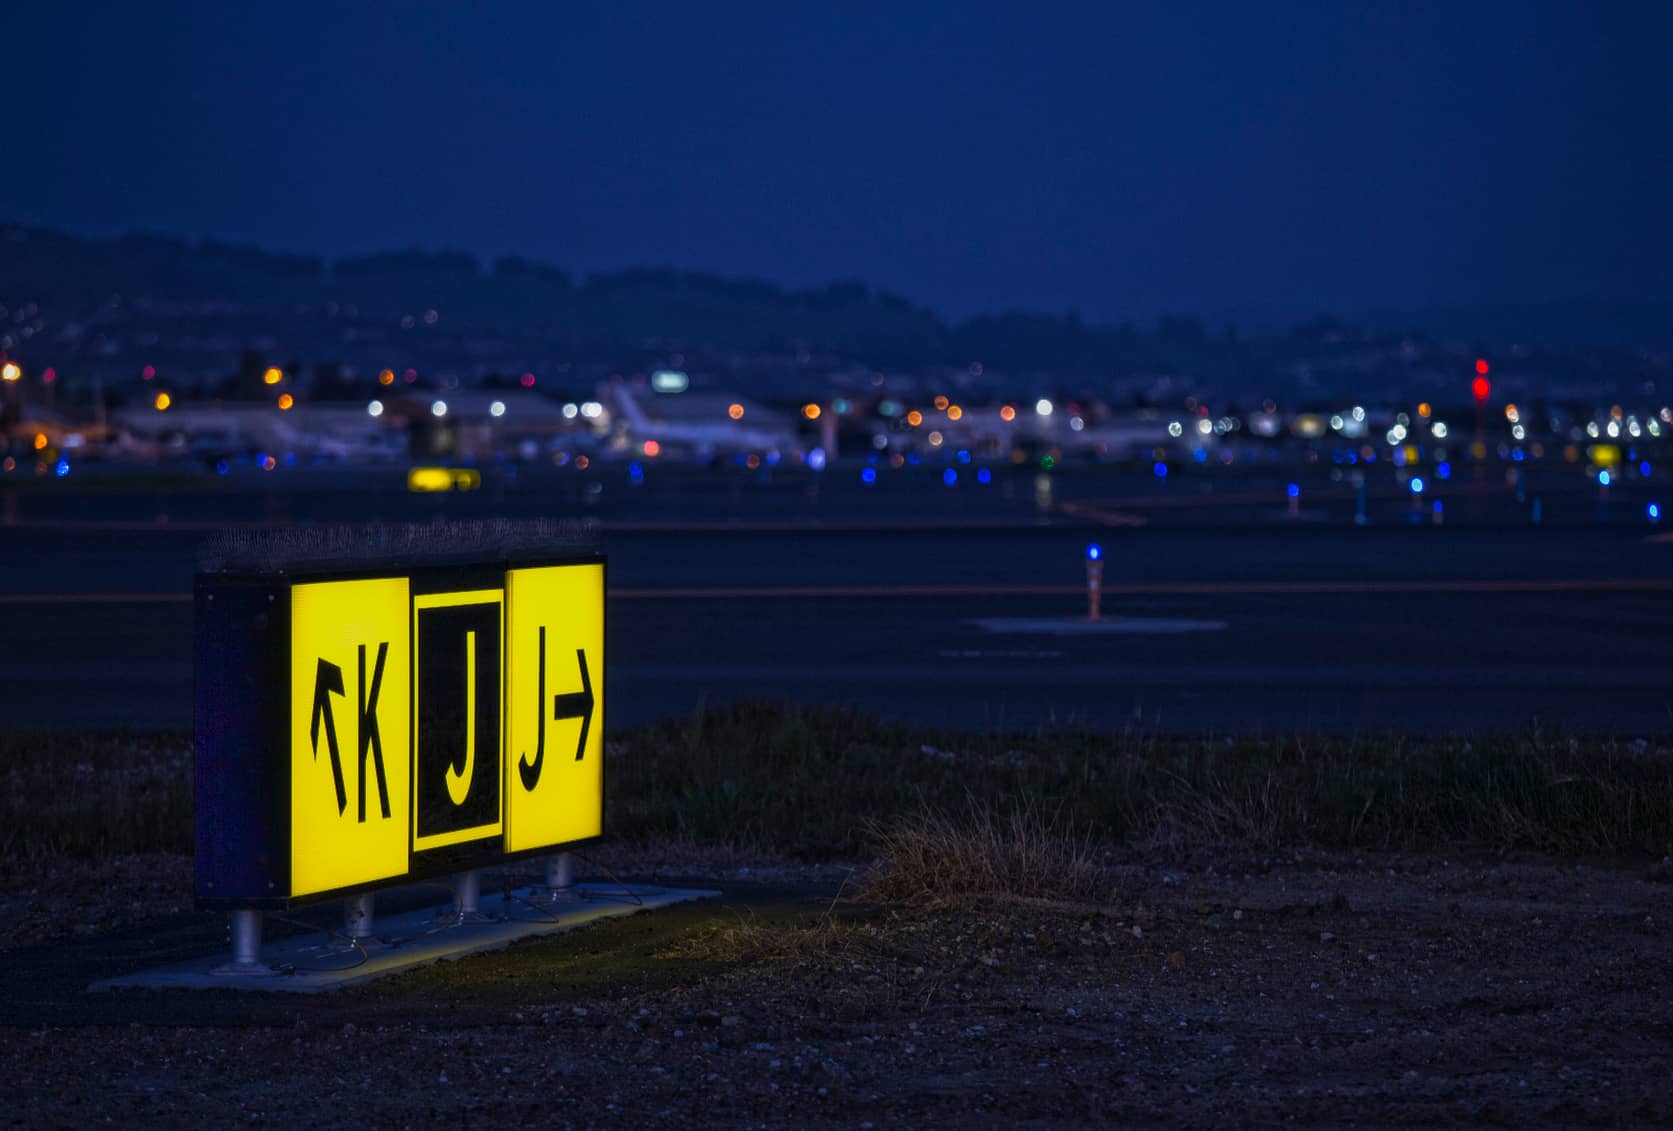 Kimley-Horn aviation consultants can help with your airfield signage needs.